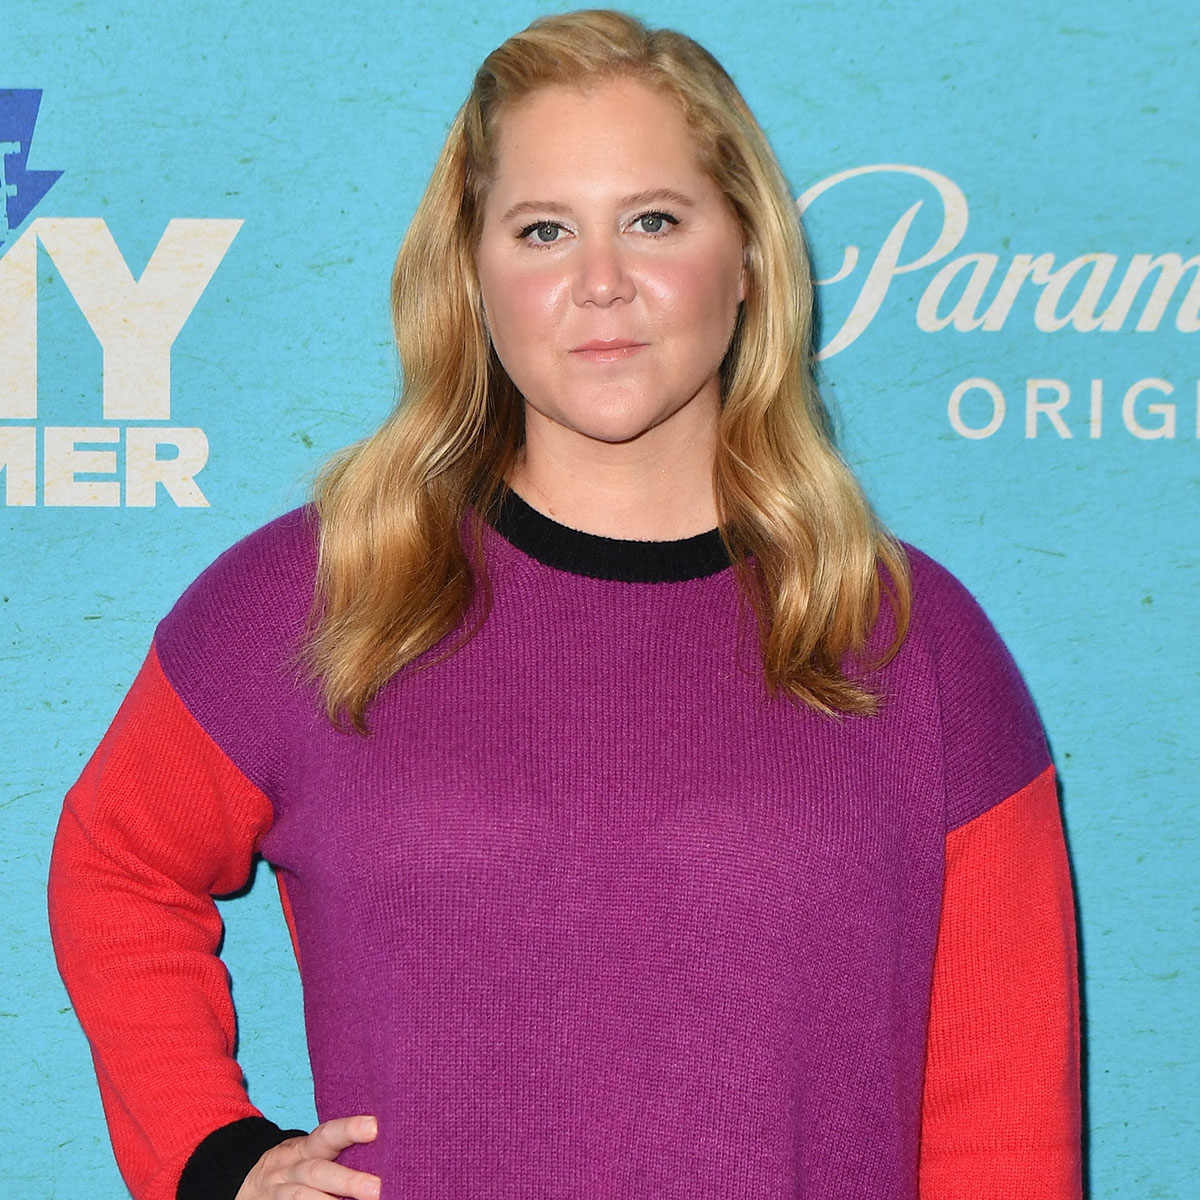 Amy Schumer Blowjob - Amy Schumer News, Pictures, and Videos - E! Online